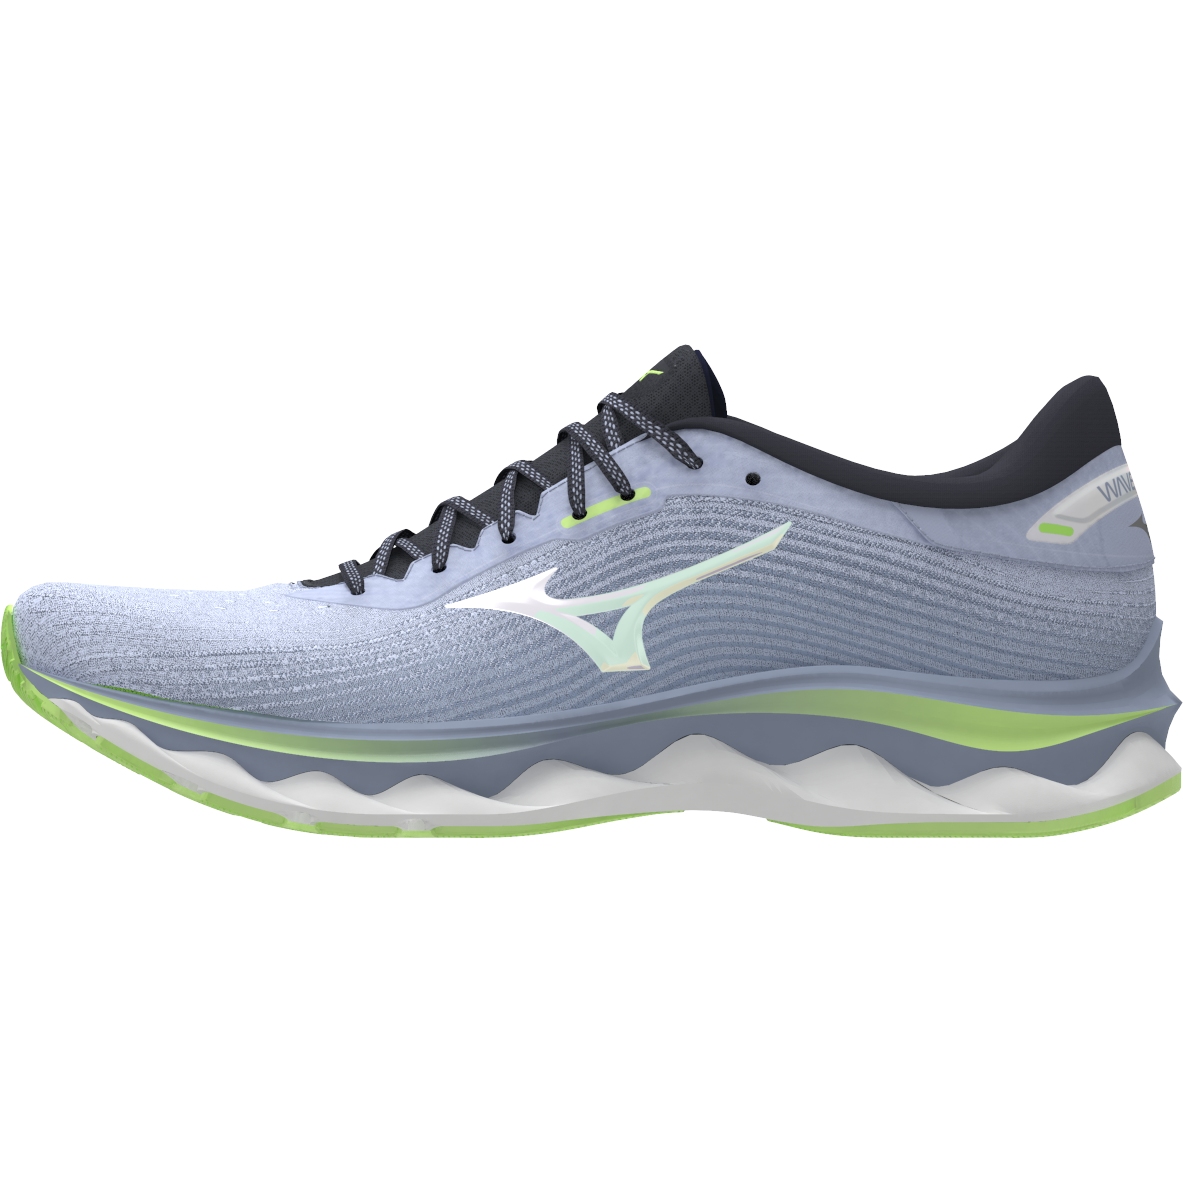 Image of Mizuno Wave Sky 5 Women's Running Shoes - Heather / White / Neo Lime